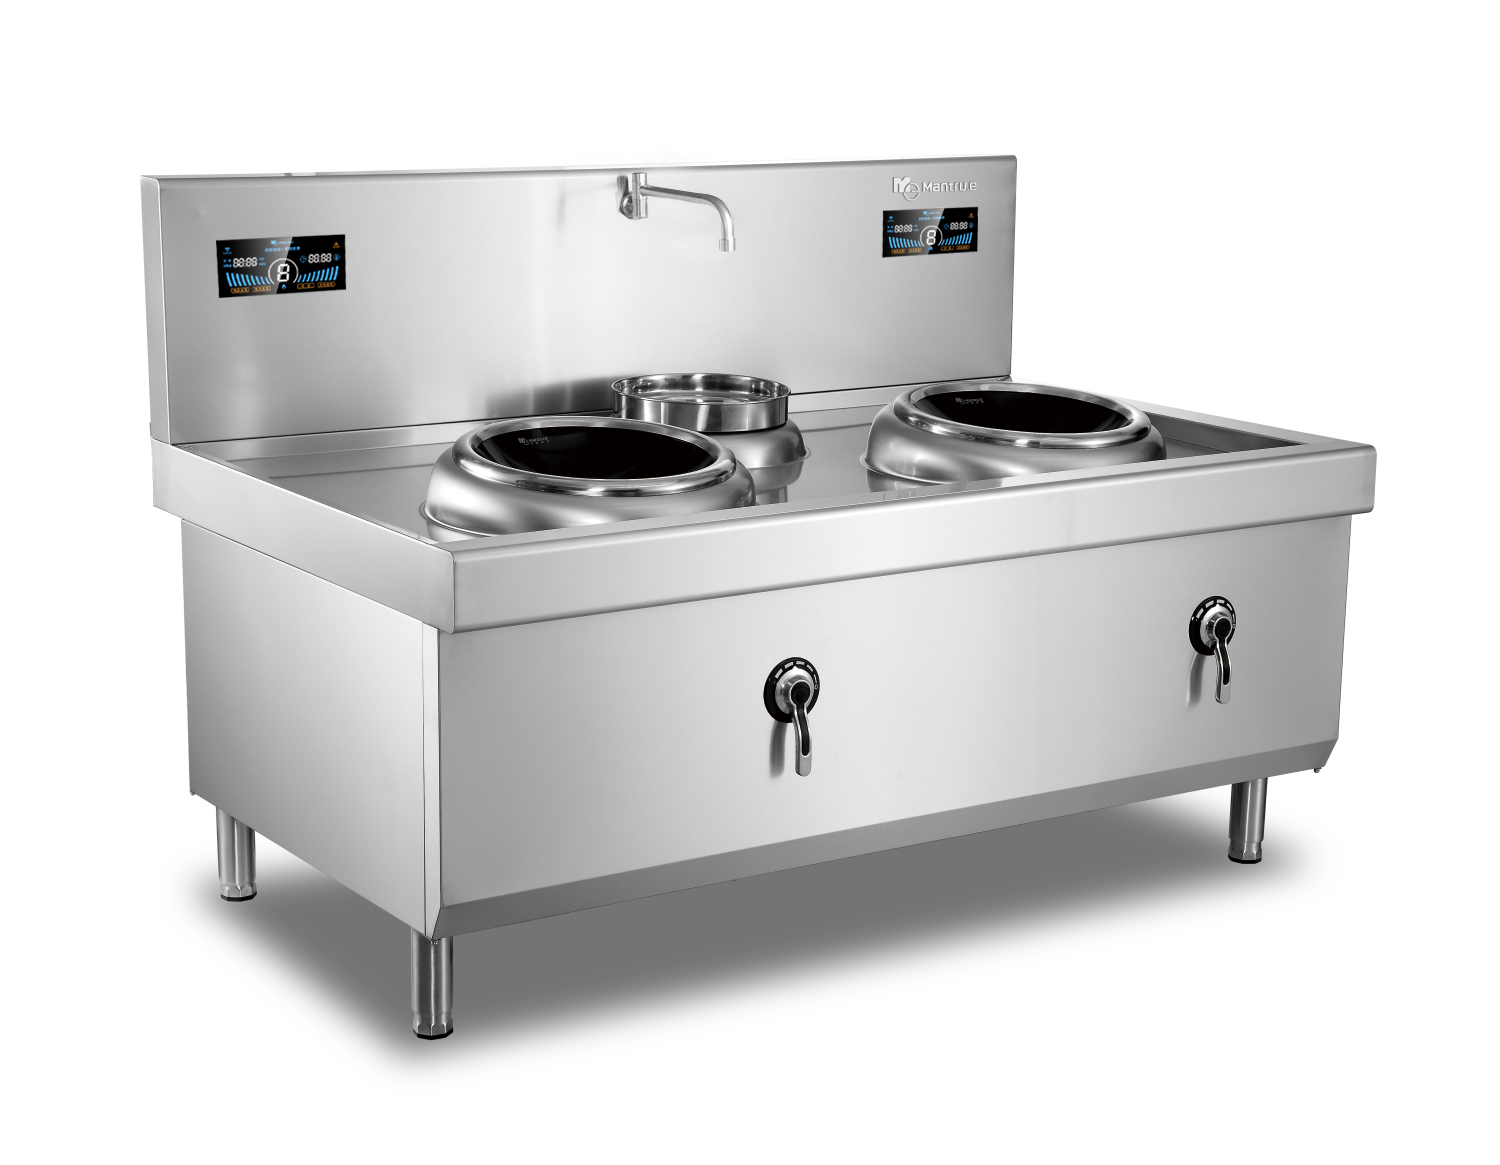 500mm Double Burner with one basin Induction Wok